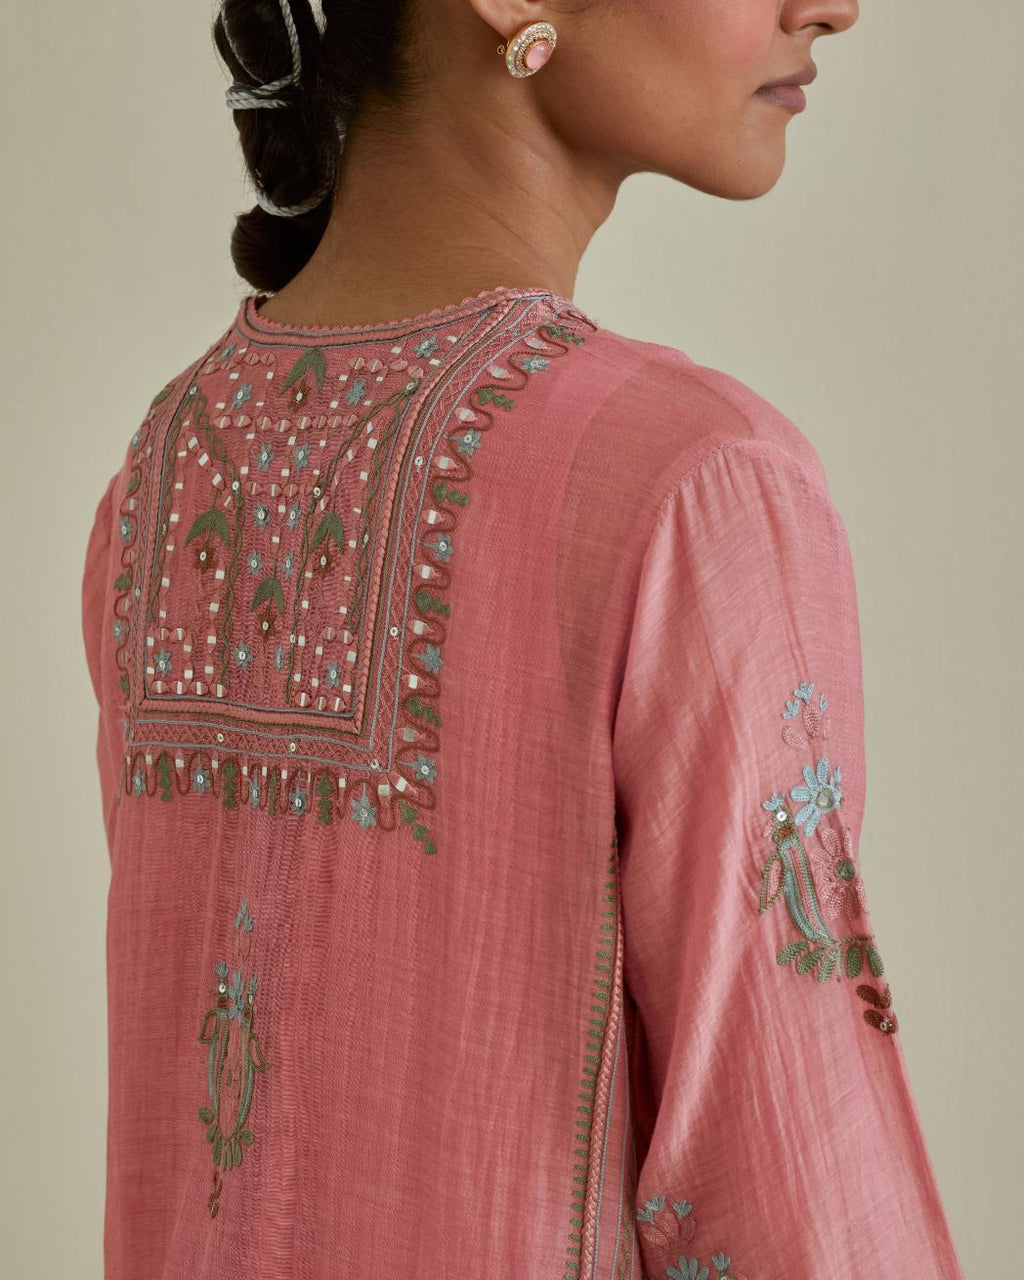 Pink cotton chanderi straight kurta set with yoke and side panels. It has allover patchwork and silk thread embroidery, highlighted with mirror, sequins, tassels and braids.